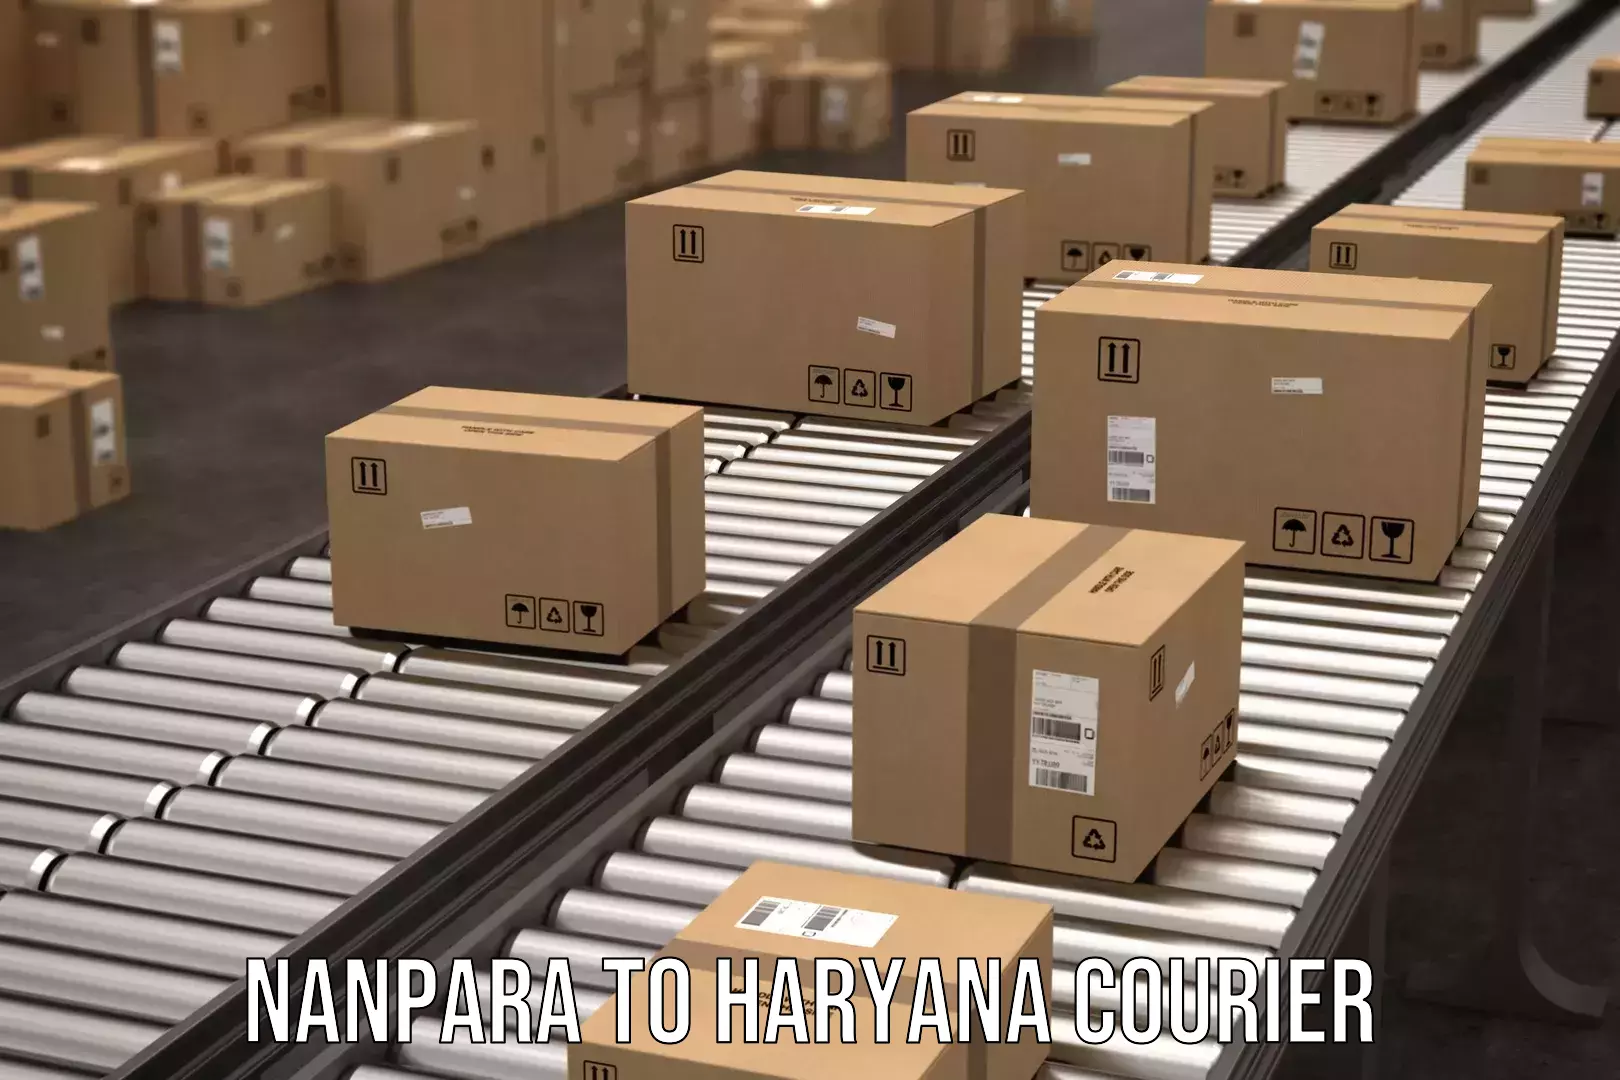 Next-day delivery options Nanpara to Bilaspur Haryana